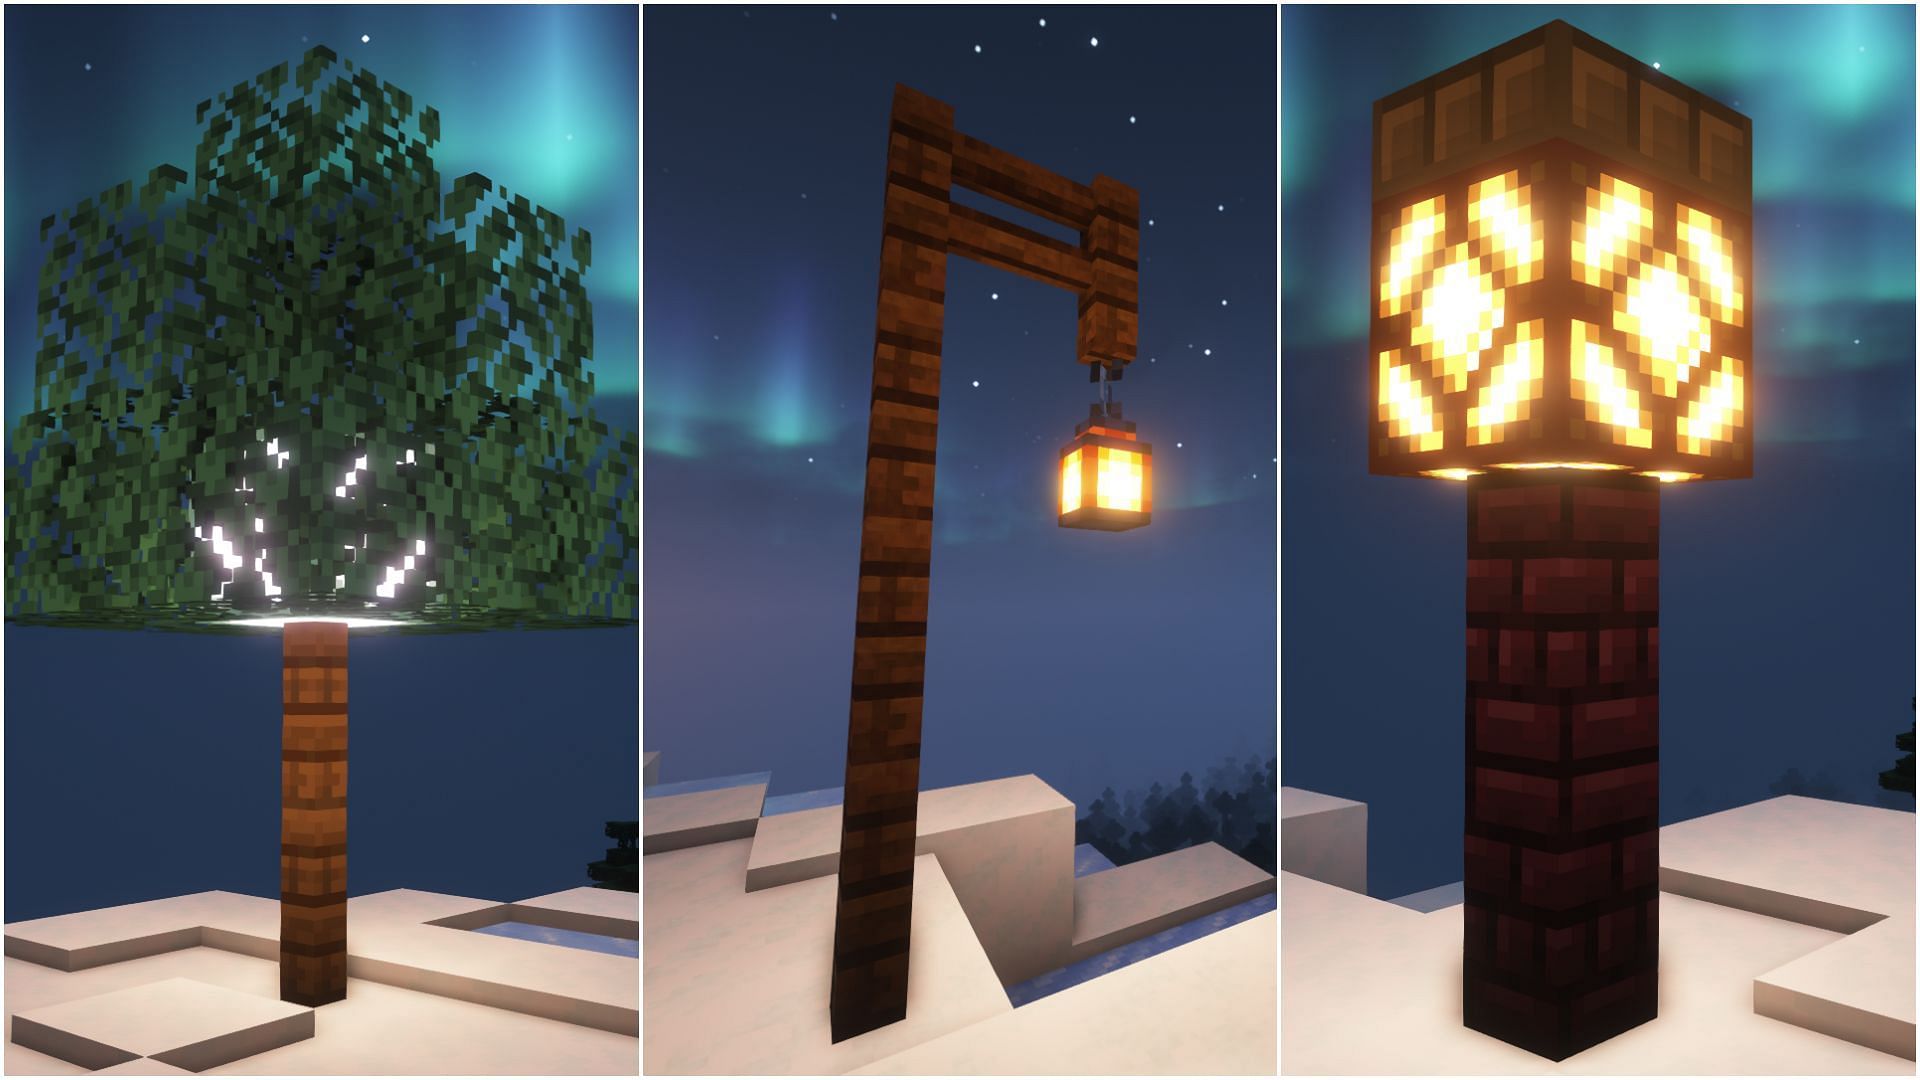 There are many ways to create lamp posts in Minecraft (Image via Sportskeeda)